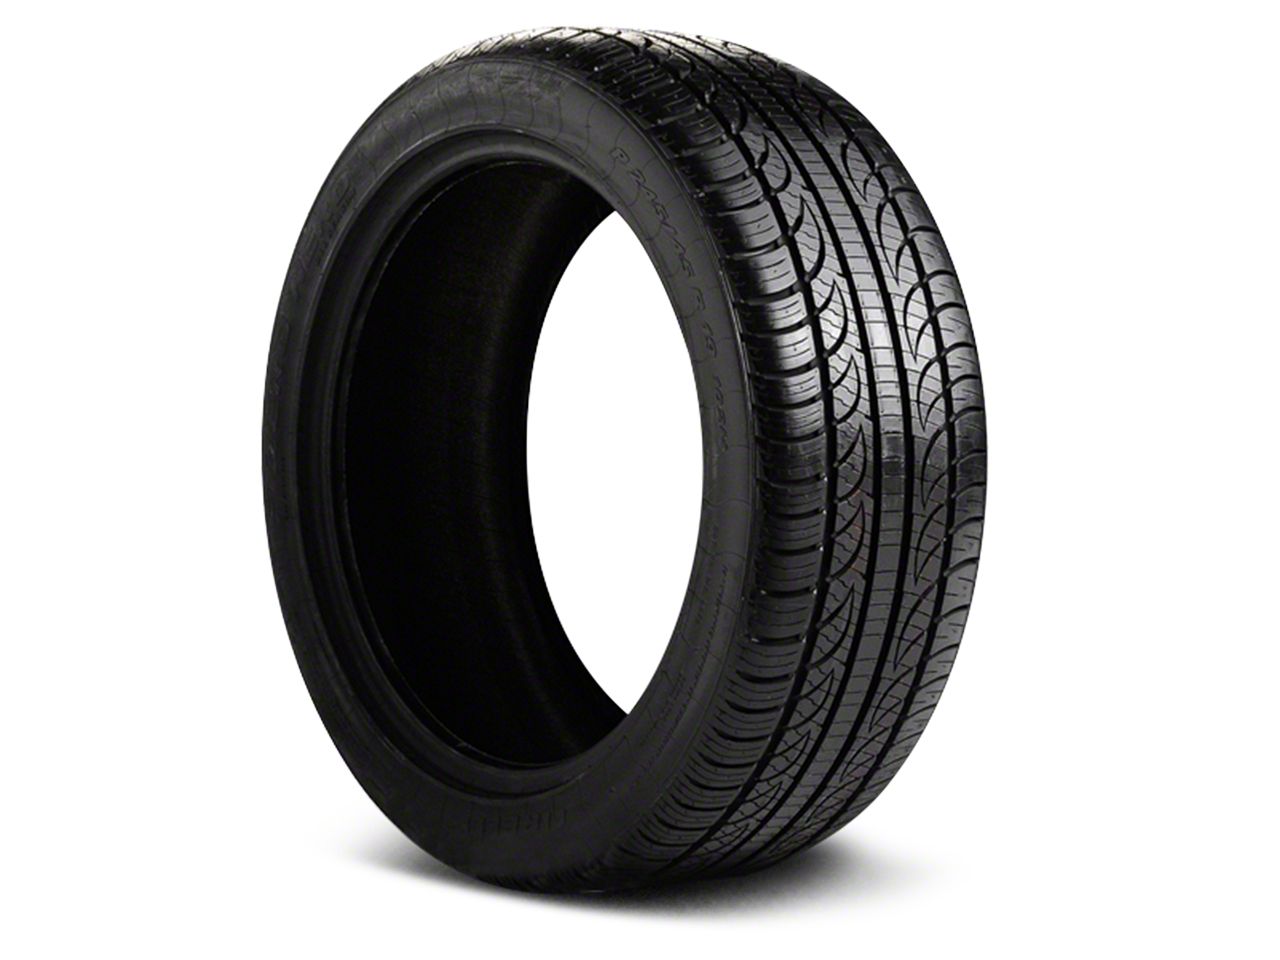 Mustang All Season Ford Tires 1979-1993